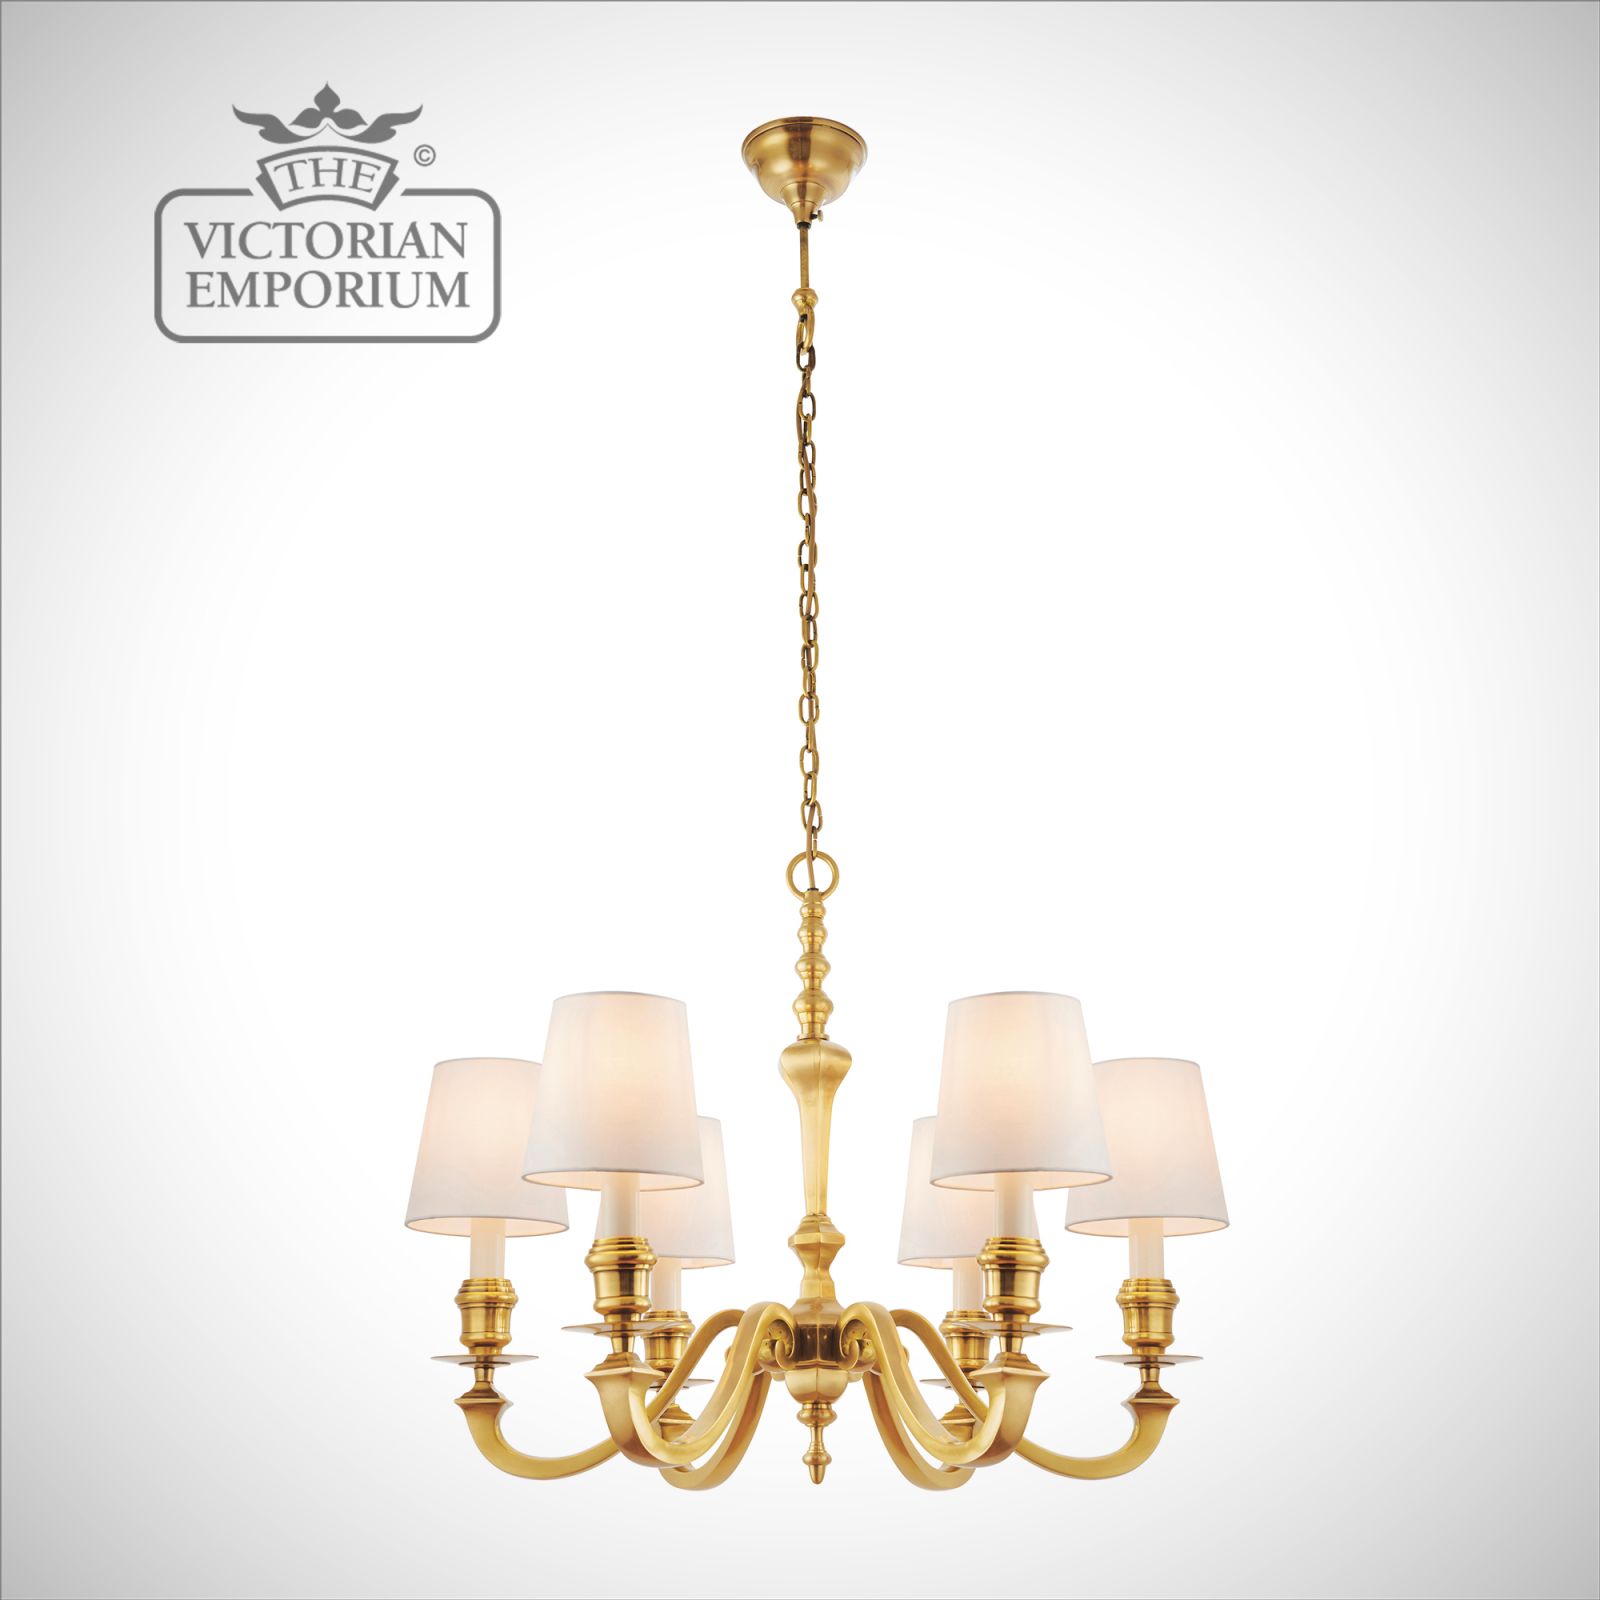 Fenbridge 6 light ceiling chandelier with our without shades